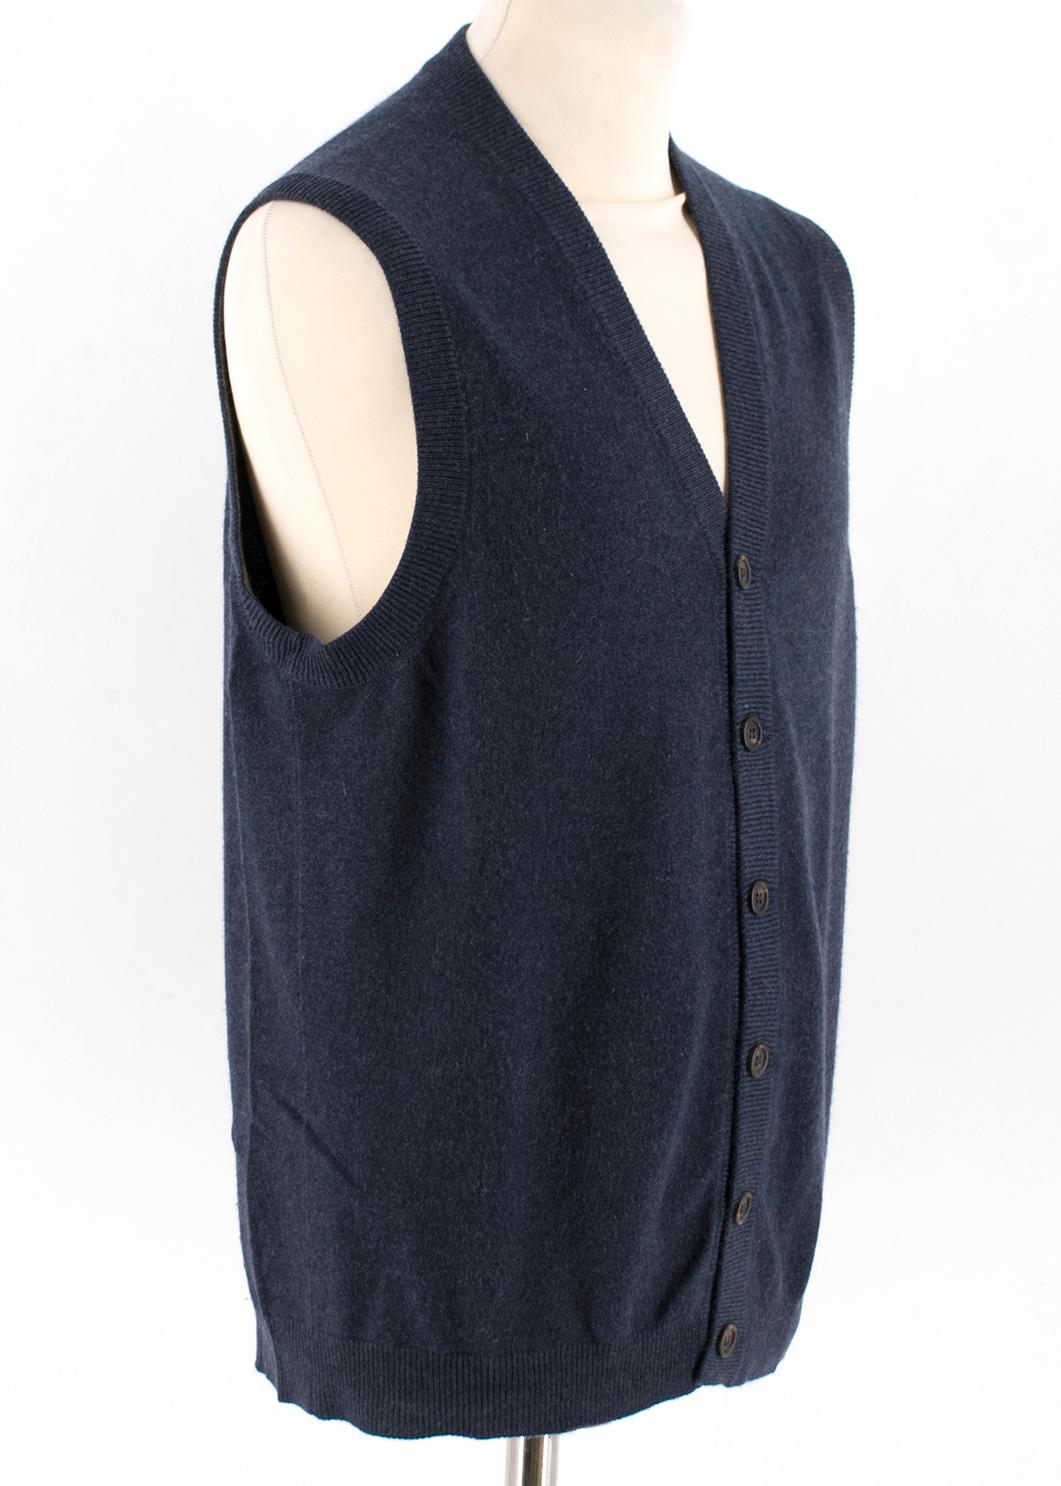 Brunello Cucinelli Cashmere Blue Sleeveless Cardigan

- Made in Italy
- Features a single breasted button fastening 
- V-neck
- 100% Cashmere

Please note, these items are pre-owned and may show some signs of storage, even when unworn and unused.